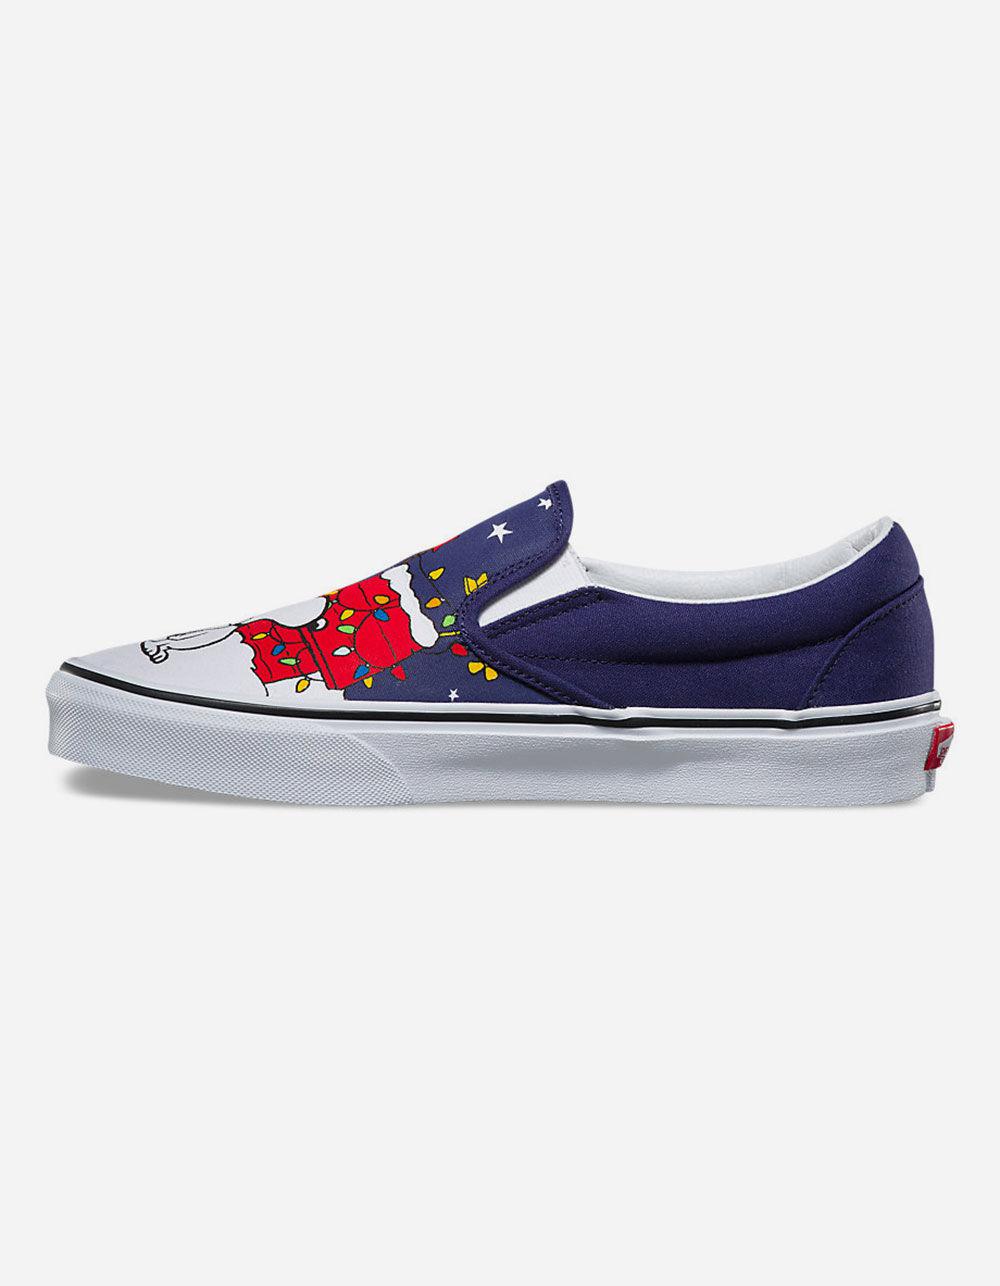 Vans Canvas X Peanuts Christmas Classic Slip-on Shoes in Blue for Men - Lyst